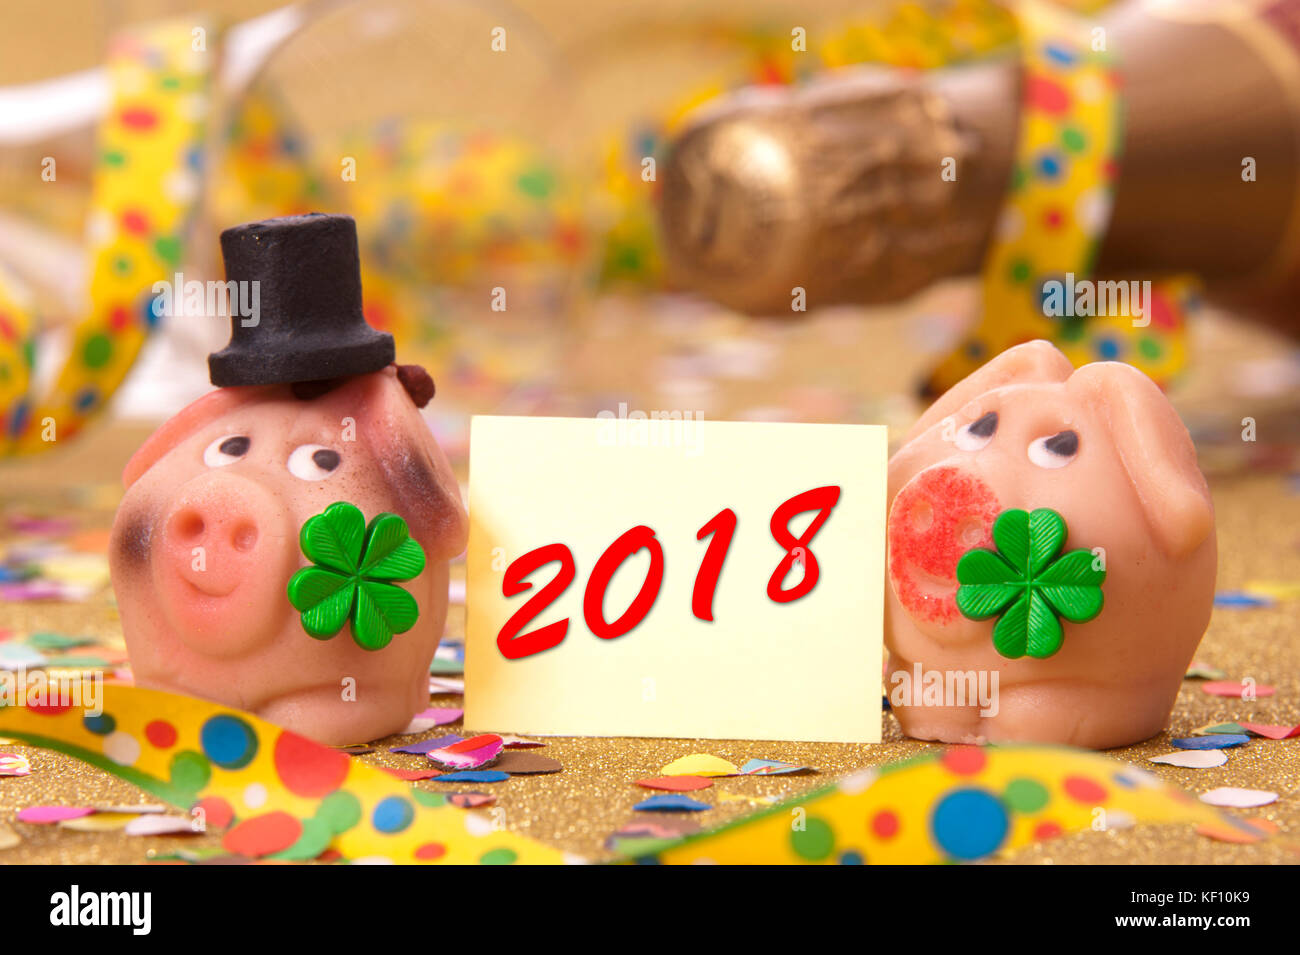 marzipan lucky charm for new year 2018 Stock Photo